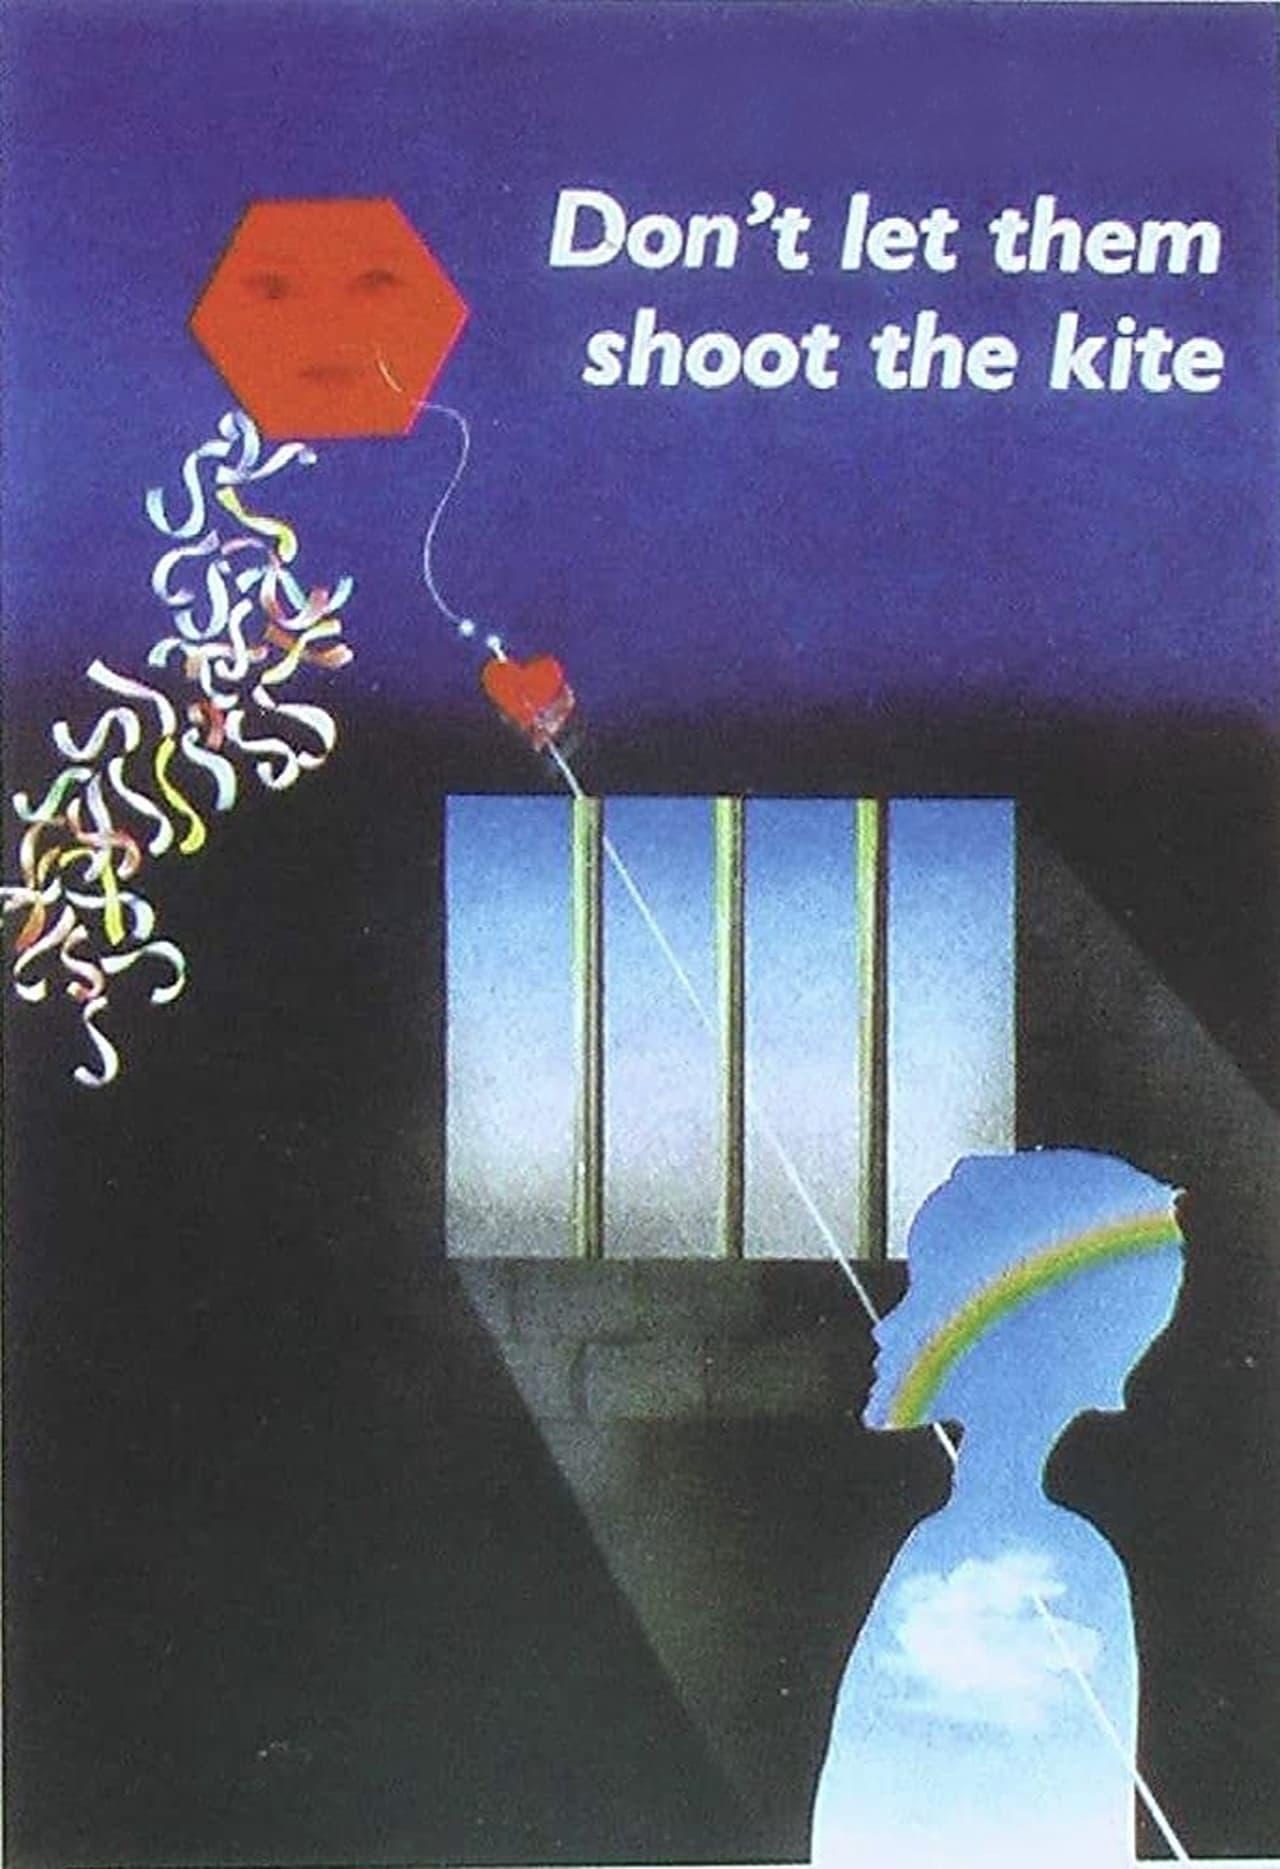 Don't Let Them Shoot the Kite poster